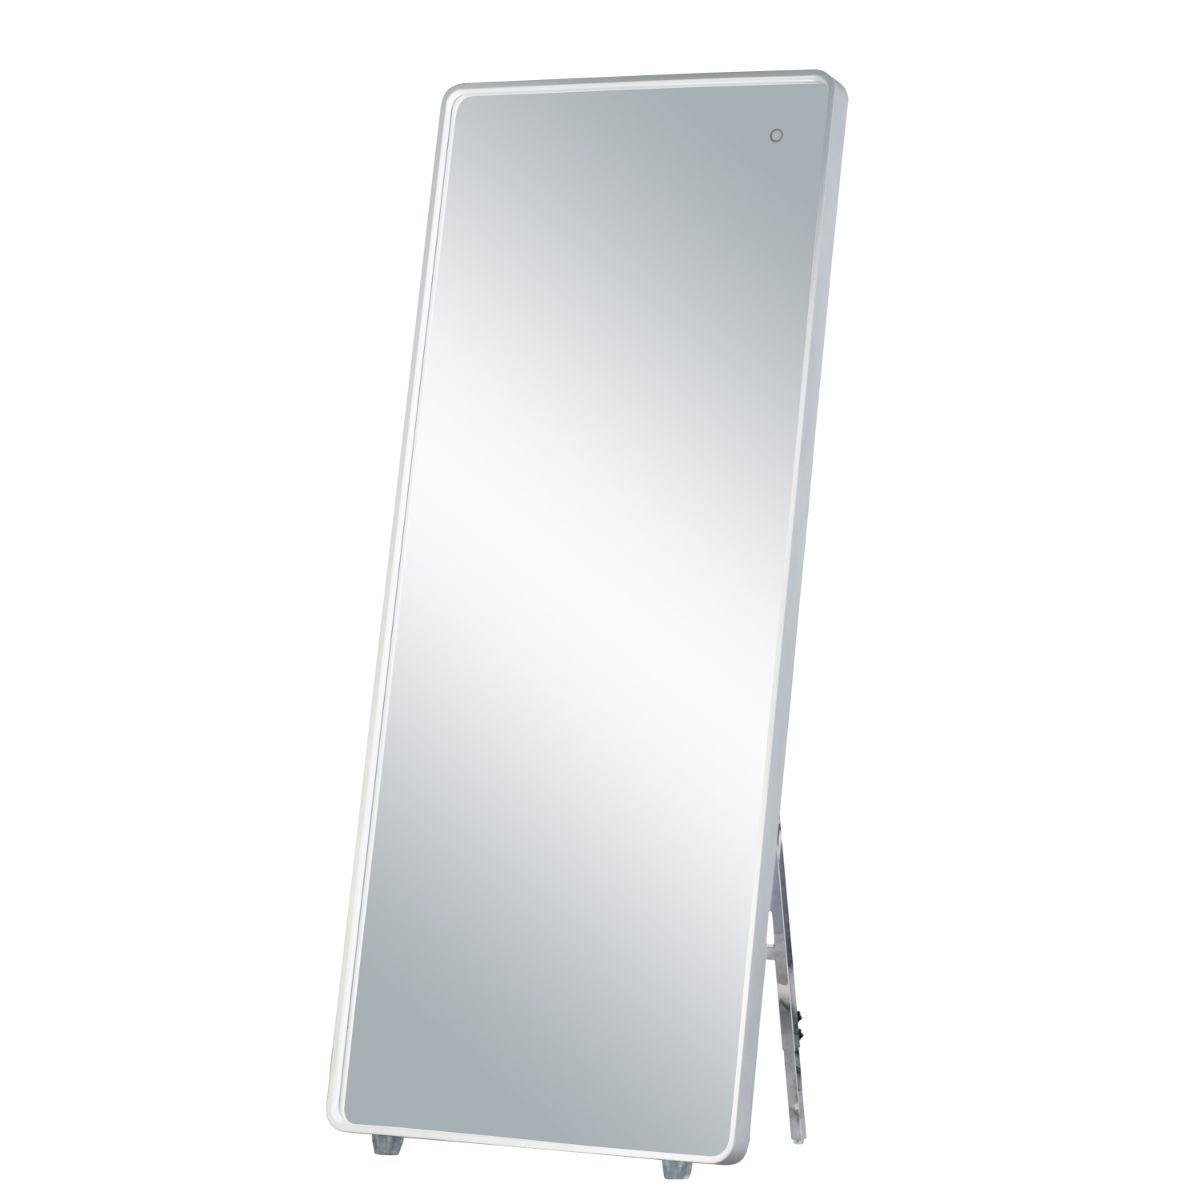 Mirror 67 in. x 28 in. Framed LED Mirror Brushed Aluminum Finish